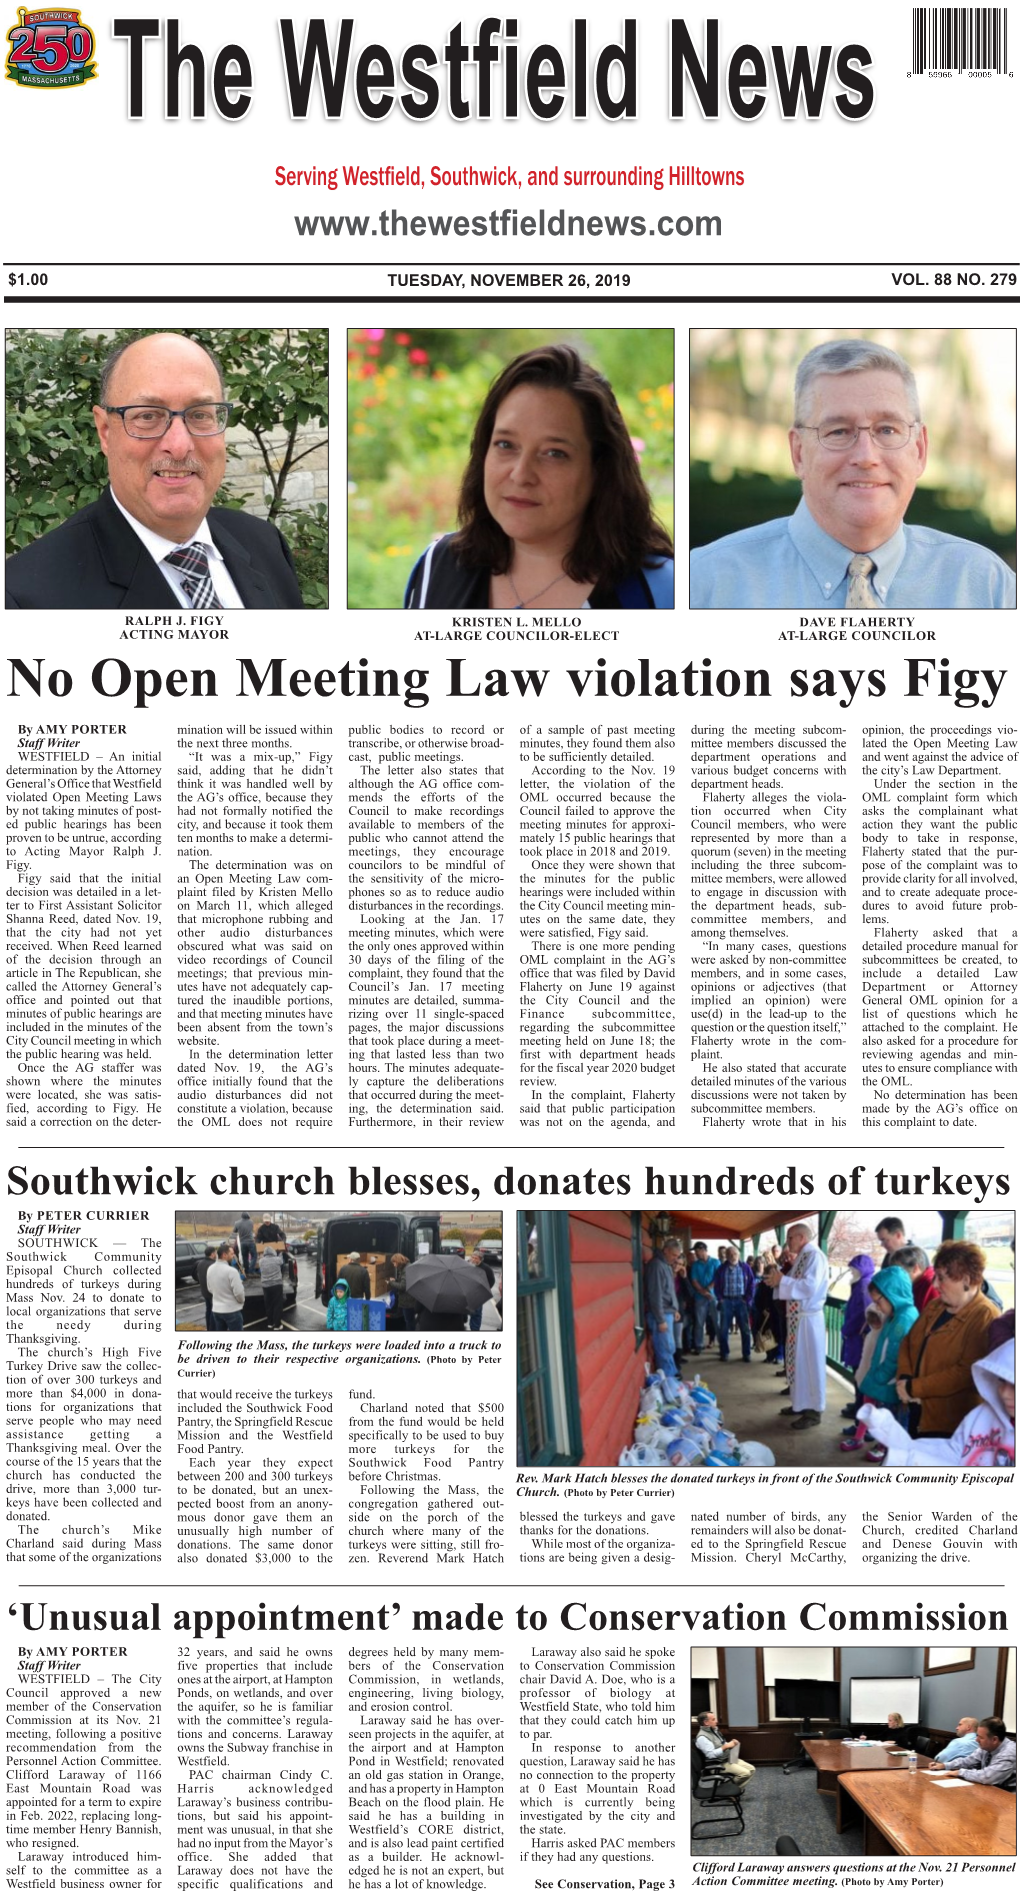 No Open Meeting Law Violation Says Figy